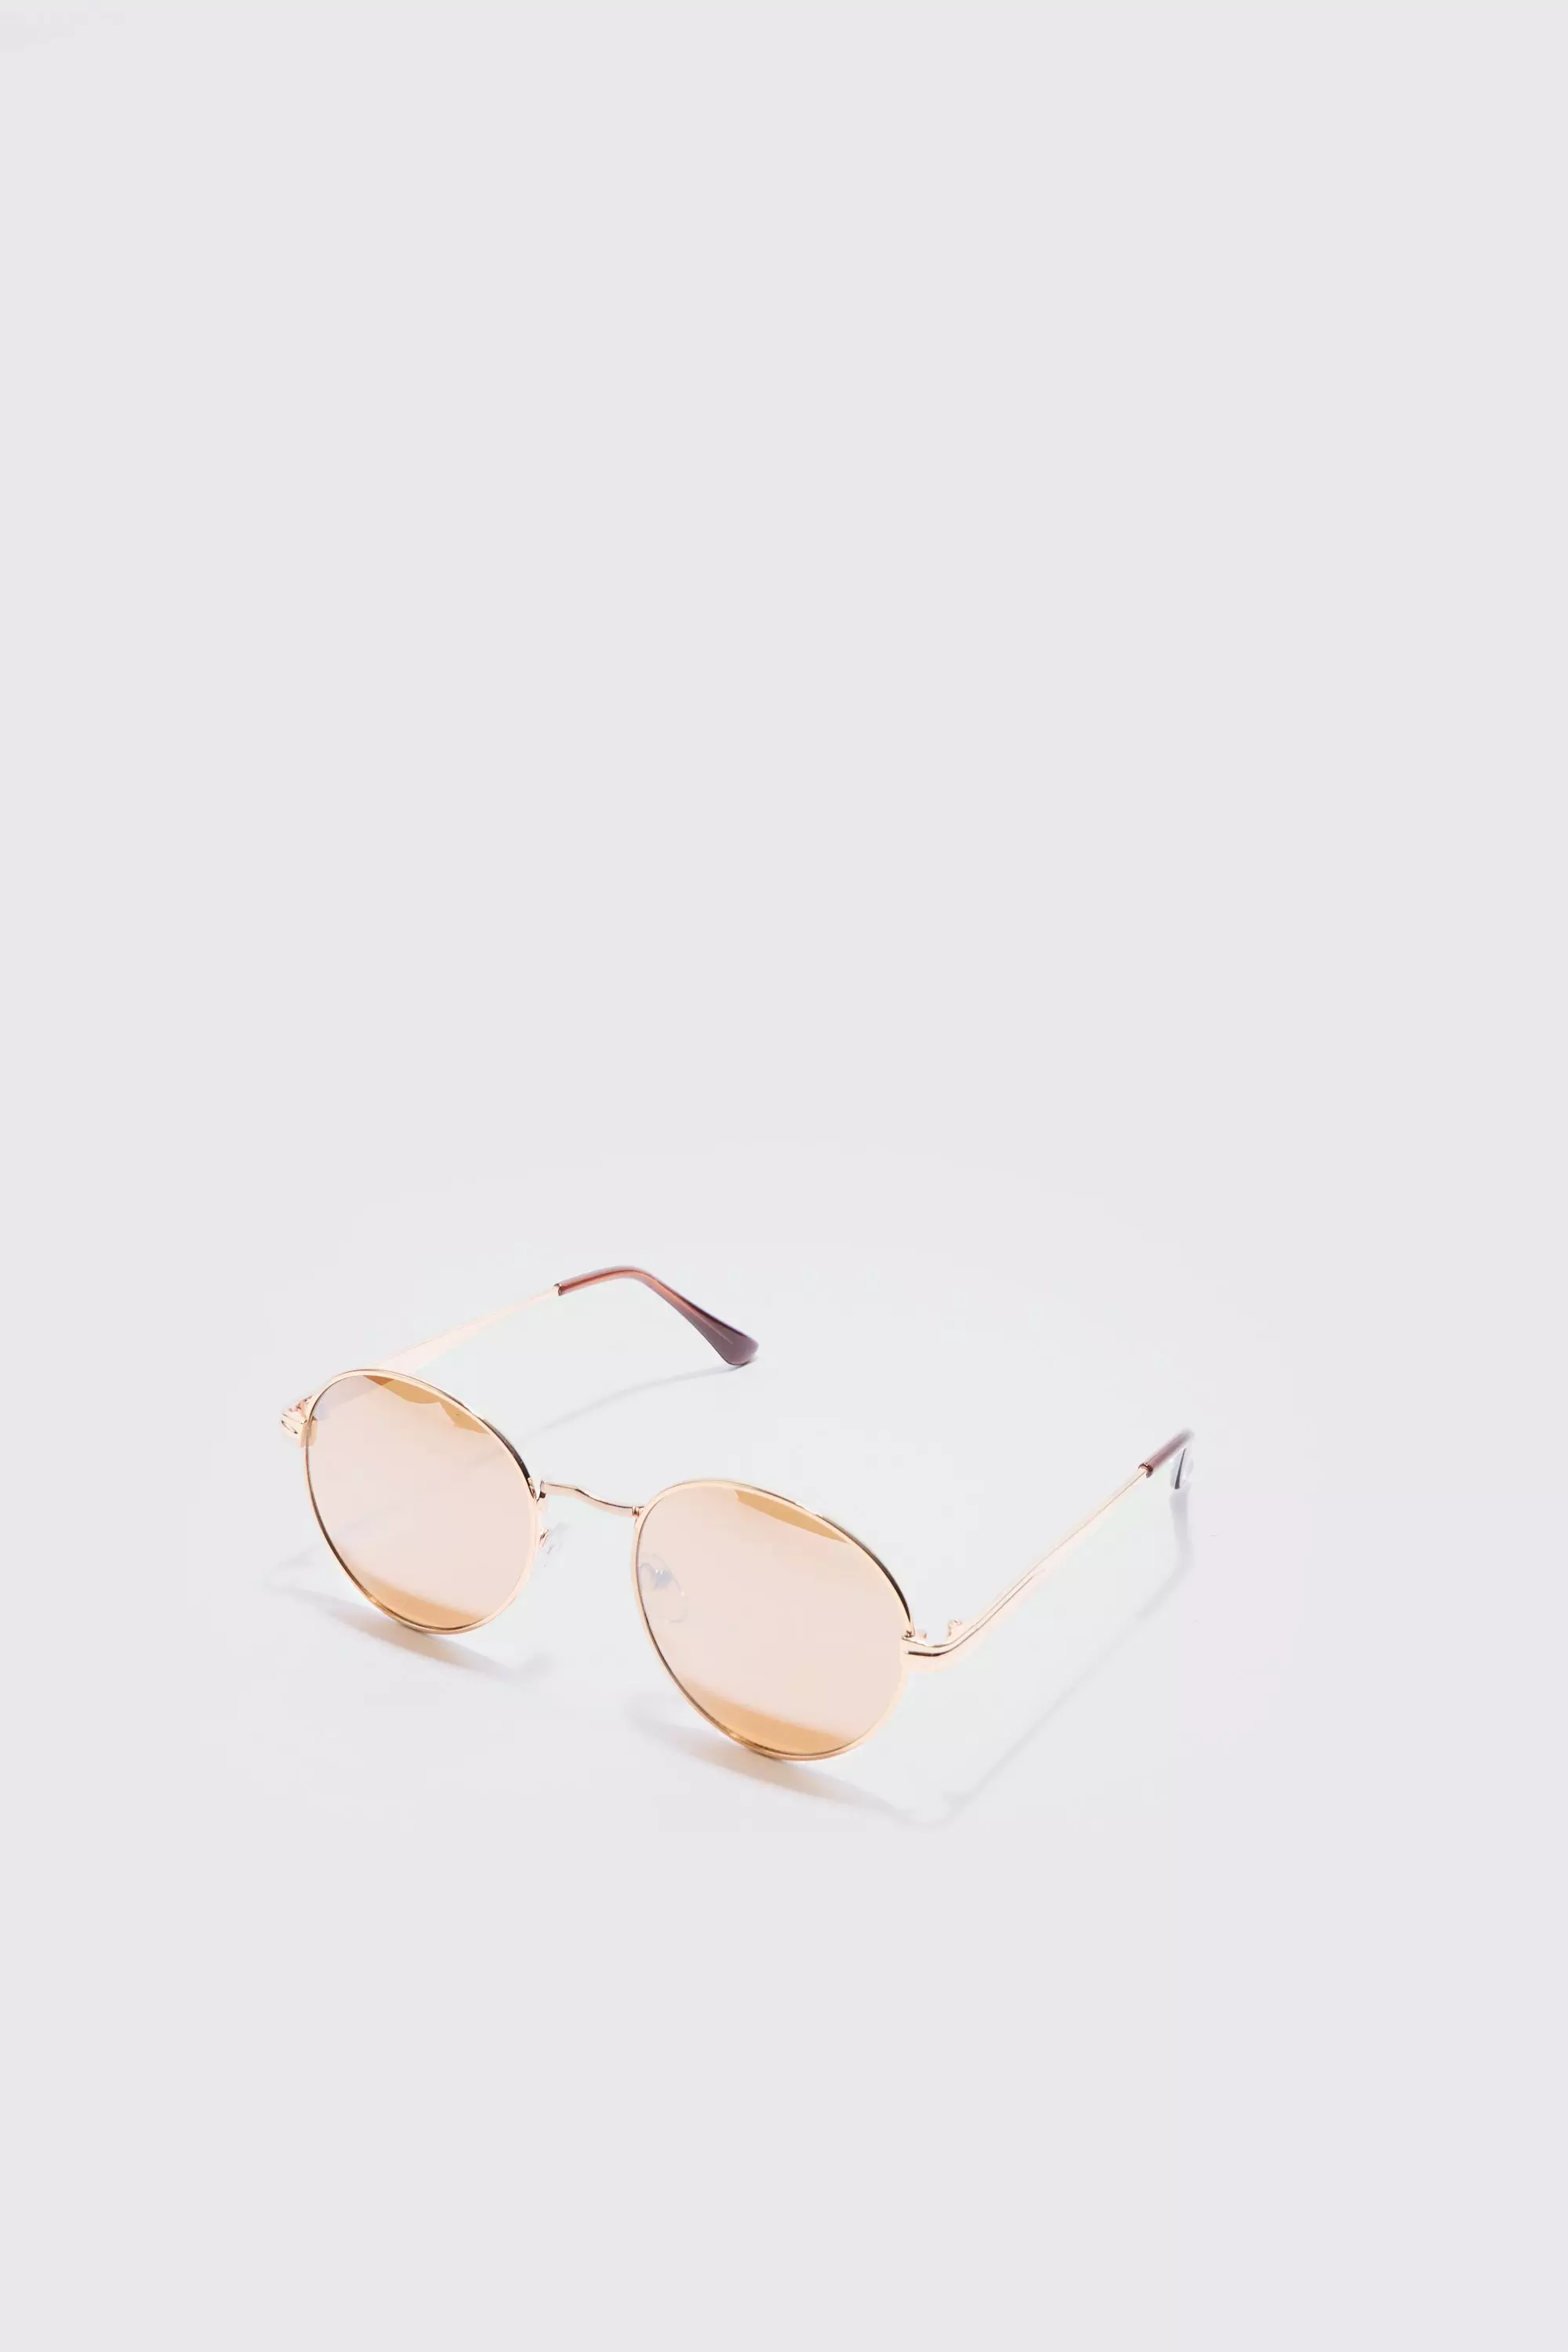 Metal Round Sunglasses In Gold Gold